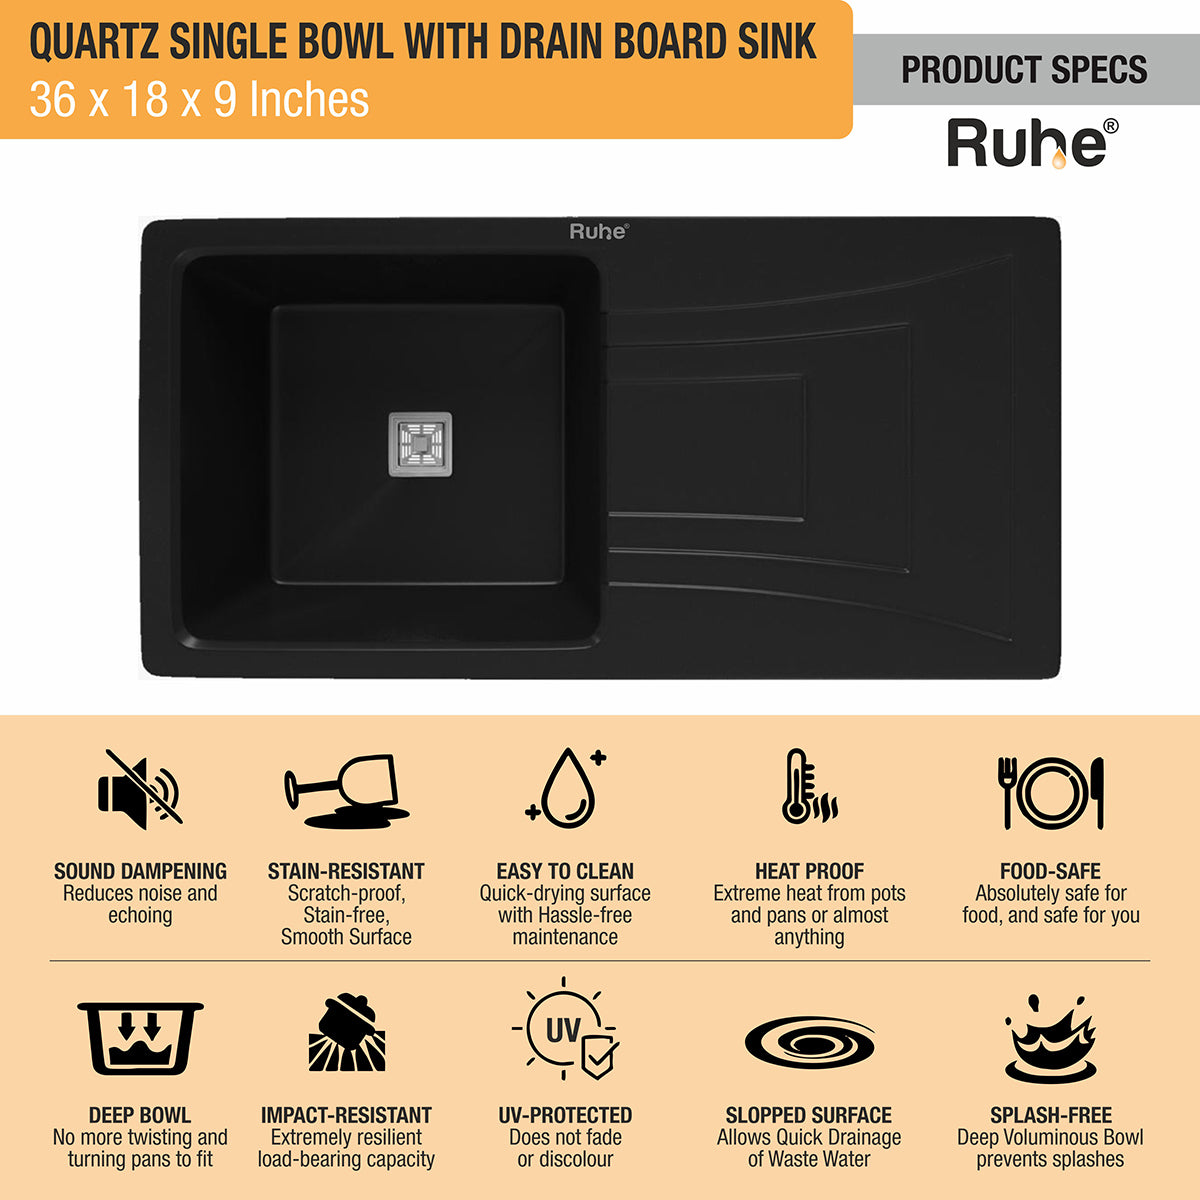 Quartz Single Bowl Black Kitchen Sink with Drainboard (36 x 18 x 9 inches) features and benefits